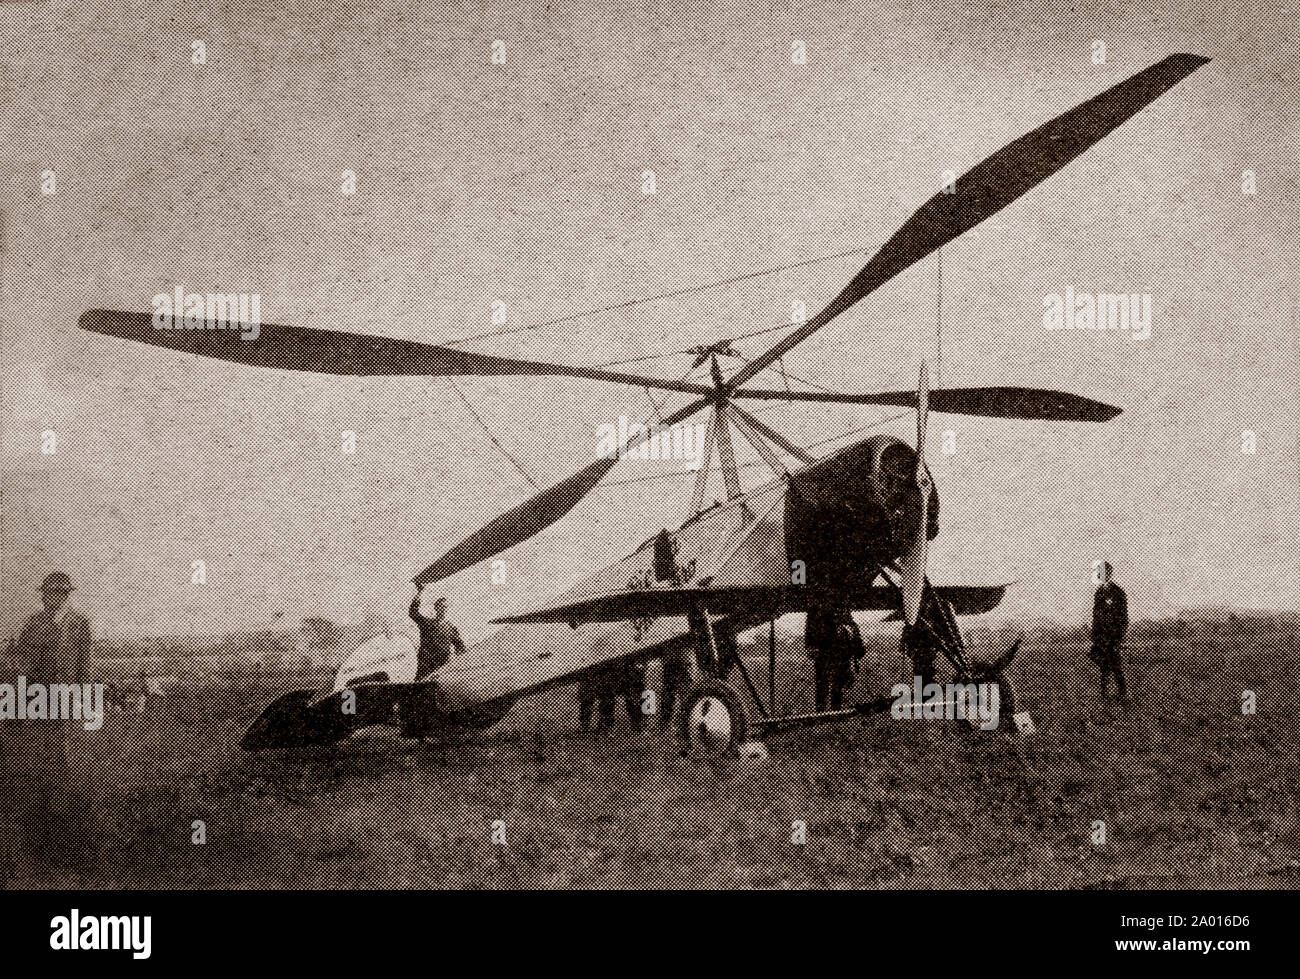 The latest engineering and technology from the 1930s: an autogyro, also known as a gyroplane or gyrocopter, is a type of rotorcraft that uses an unpowered rotor in free autorotation to develop lift. Forward thrust is provided independently, by an engine-driven propeller. While similar to a helicopter rotor in appearance, the autogyro's rotor must have air flowing across the rotor disc to generate rotation, and the air flows upwards through the rotor disc rather than down. Stock Photo